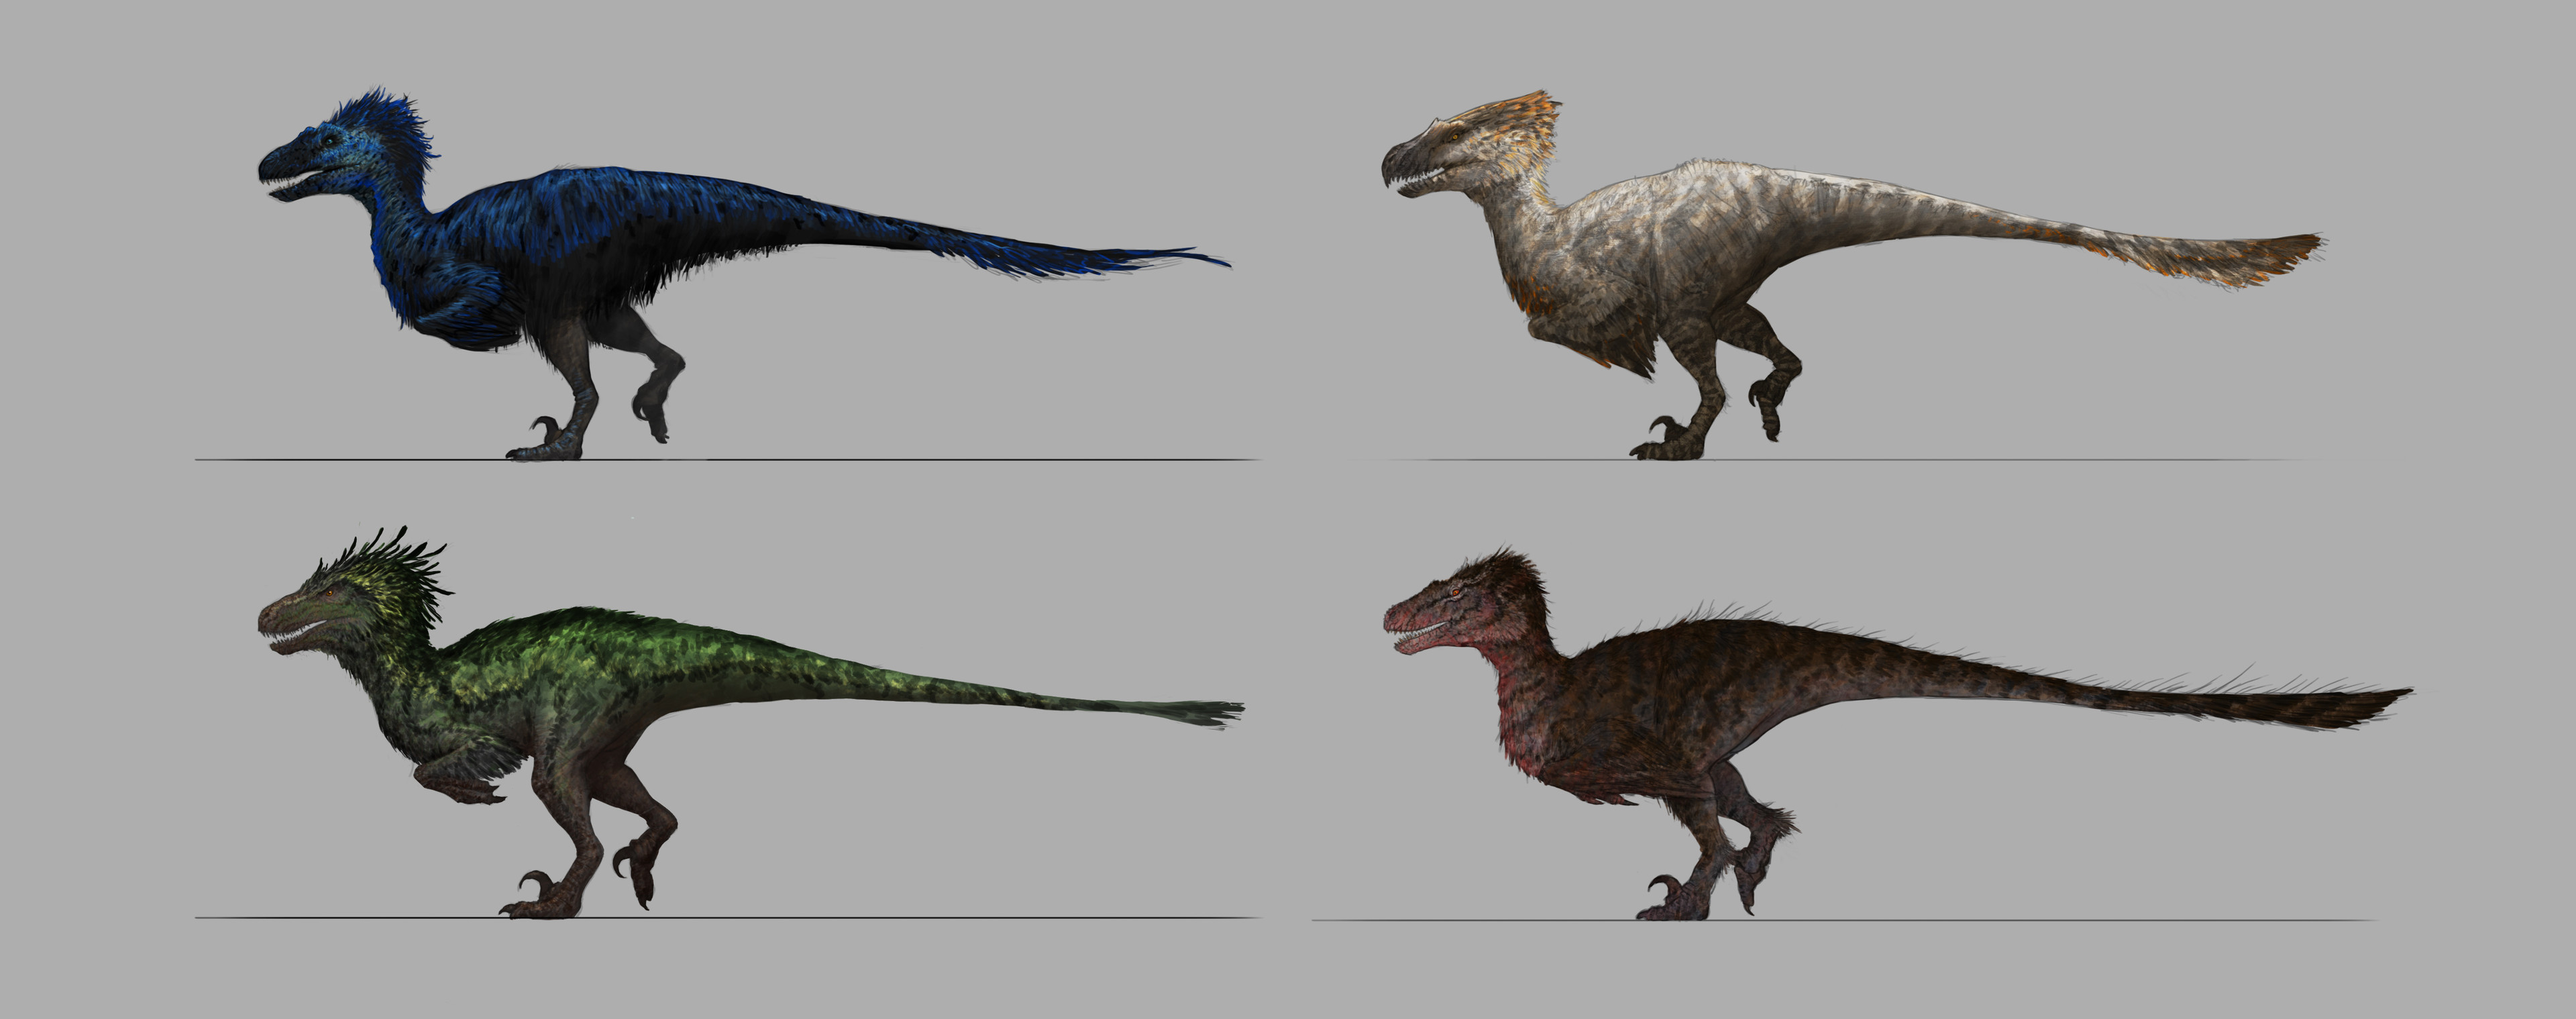 Initial color/plumage thumbnails. Taking inspiration from various real world creatures. 